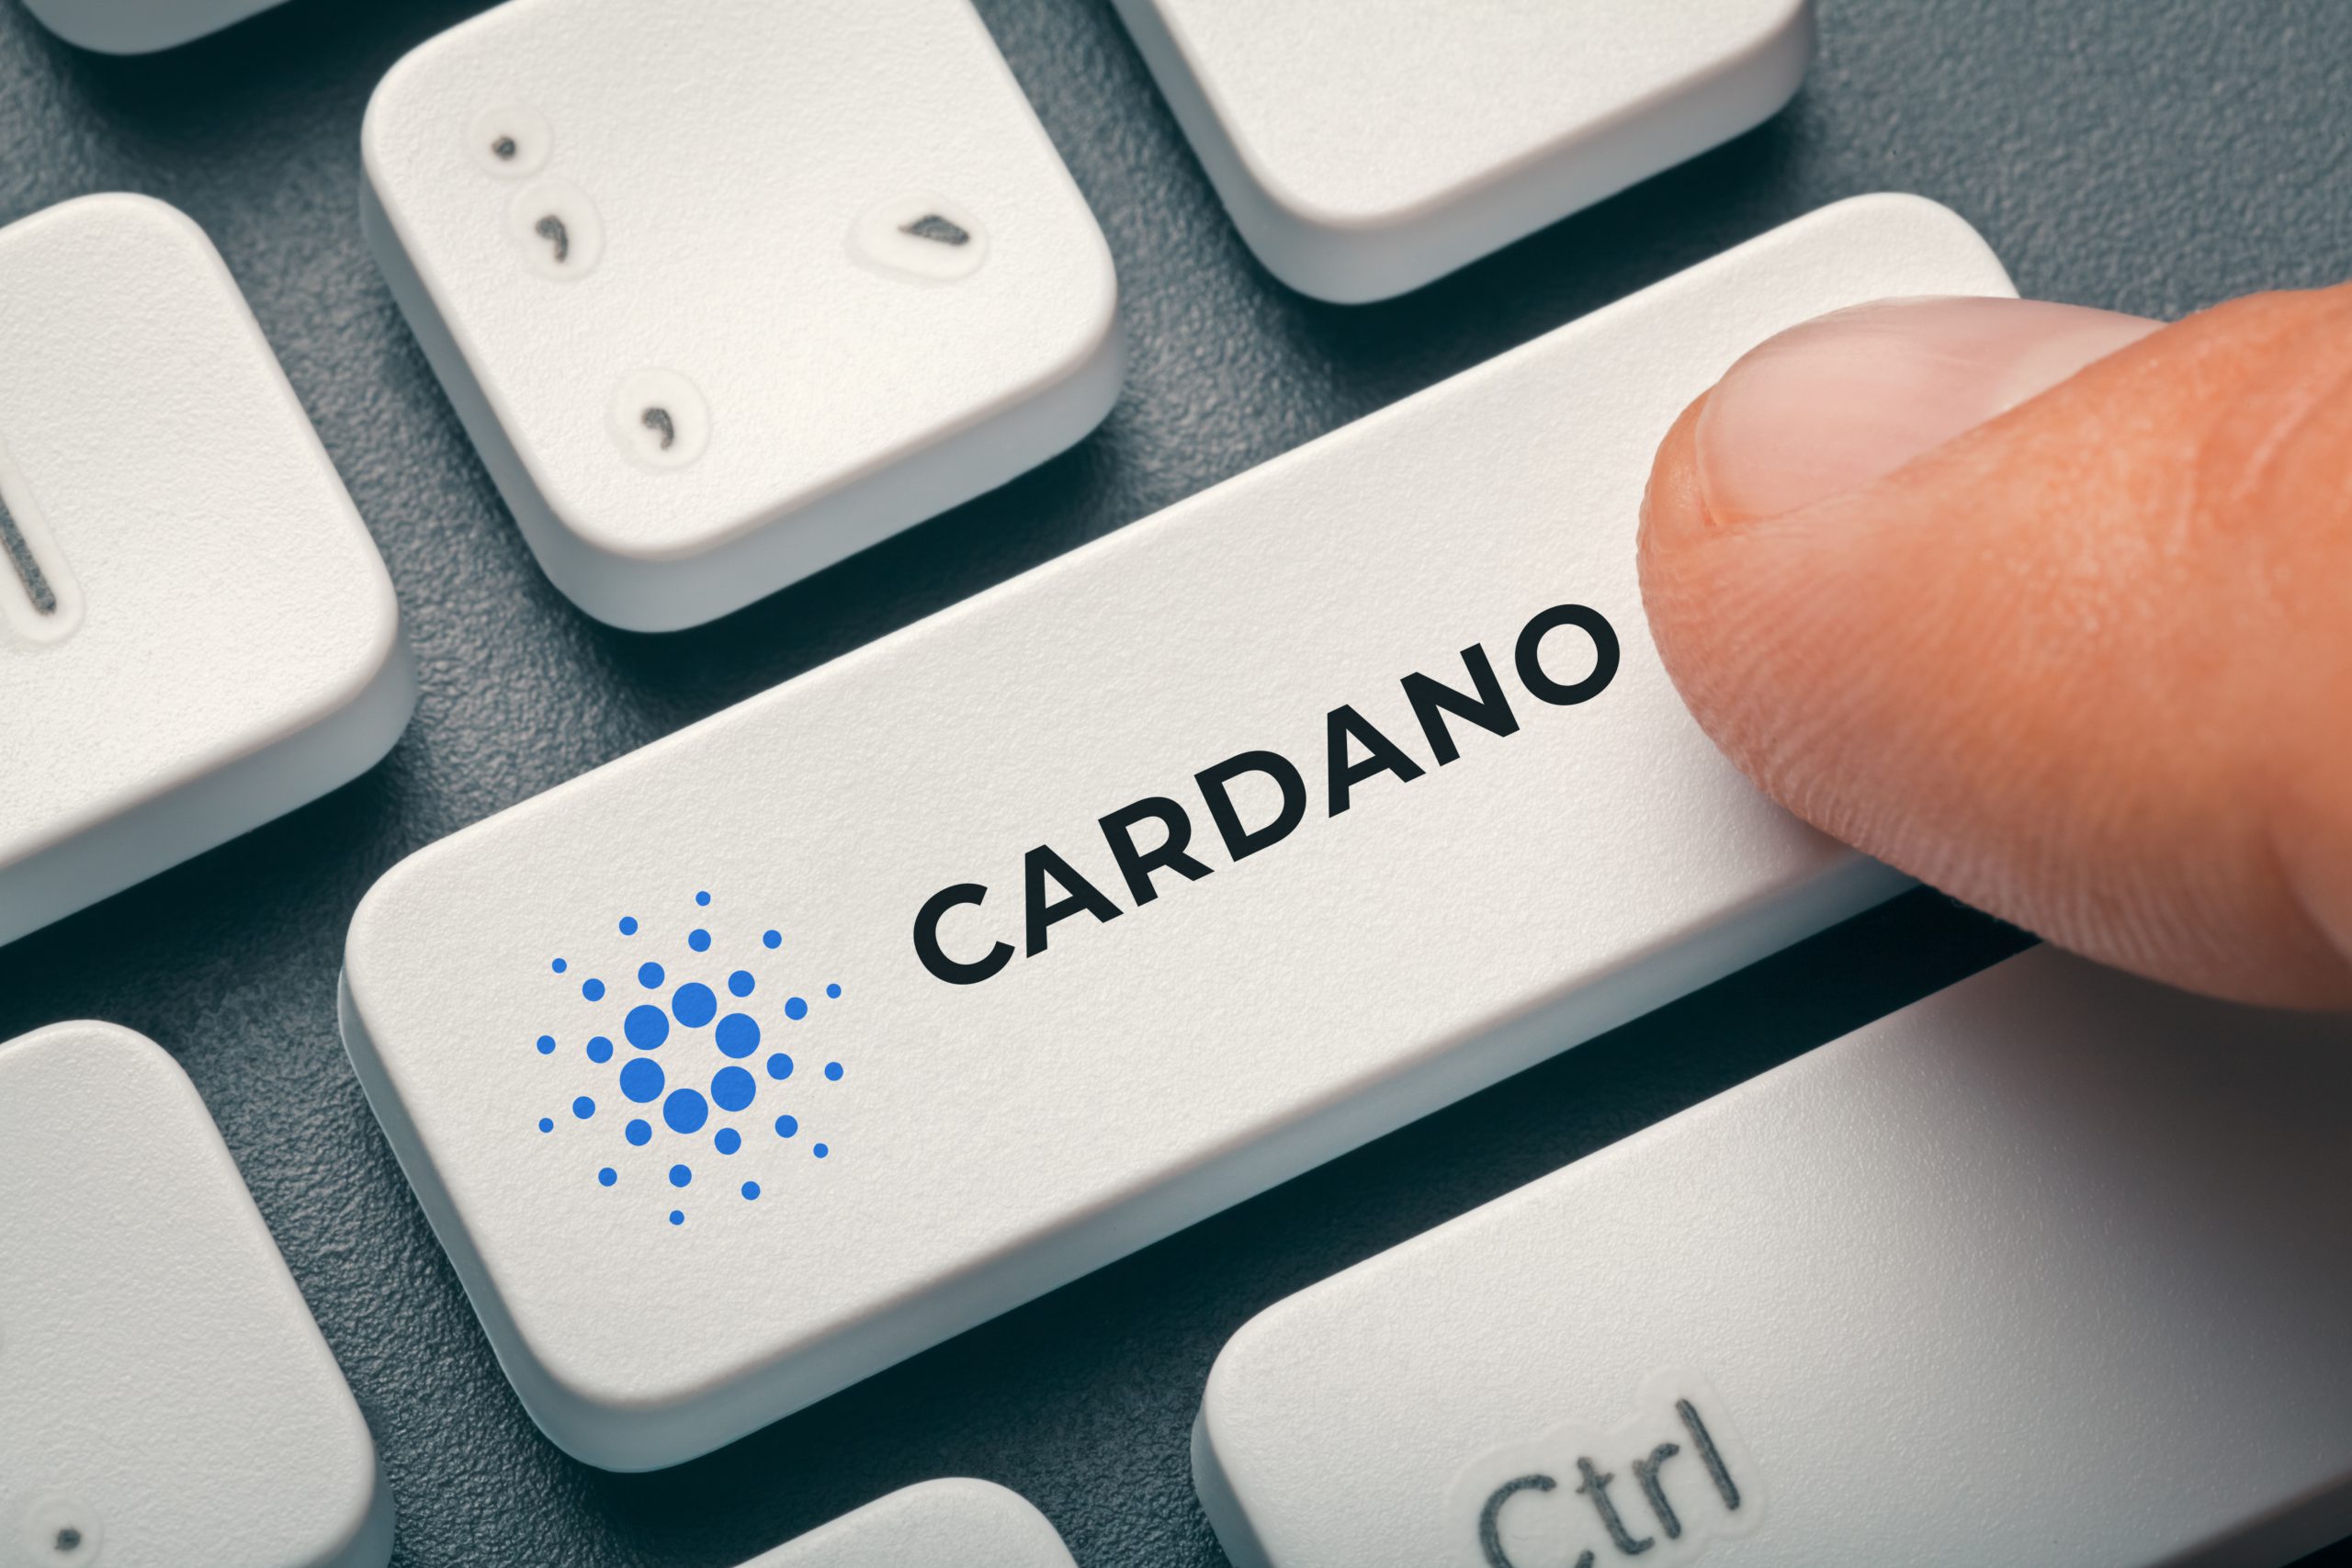 Cardano Daedalus brings a ton of great features to the ADA ecosystem
